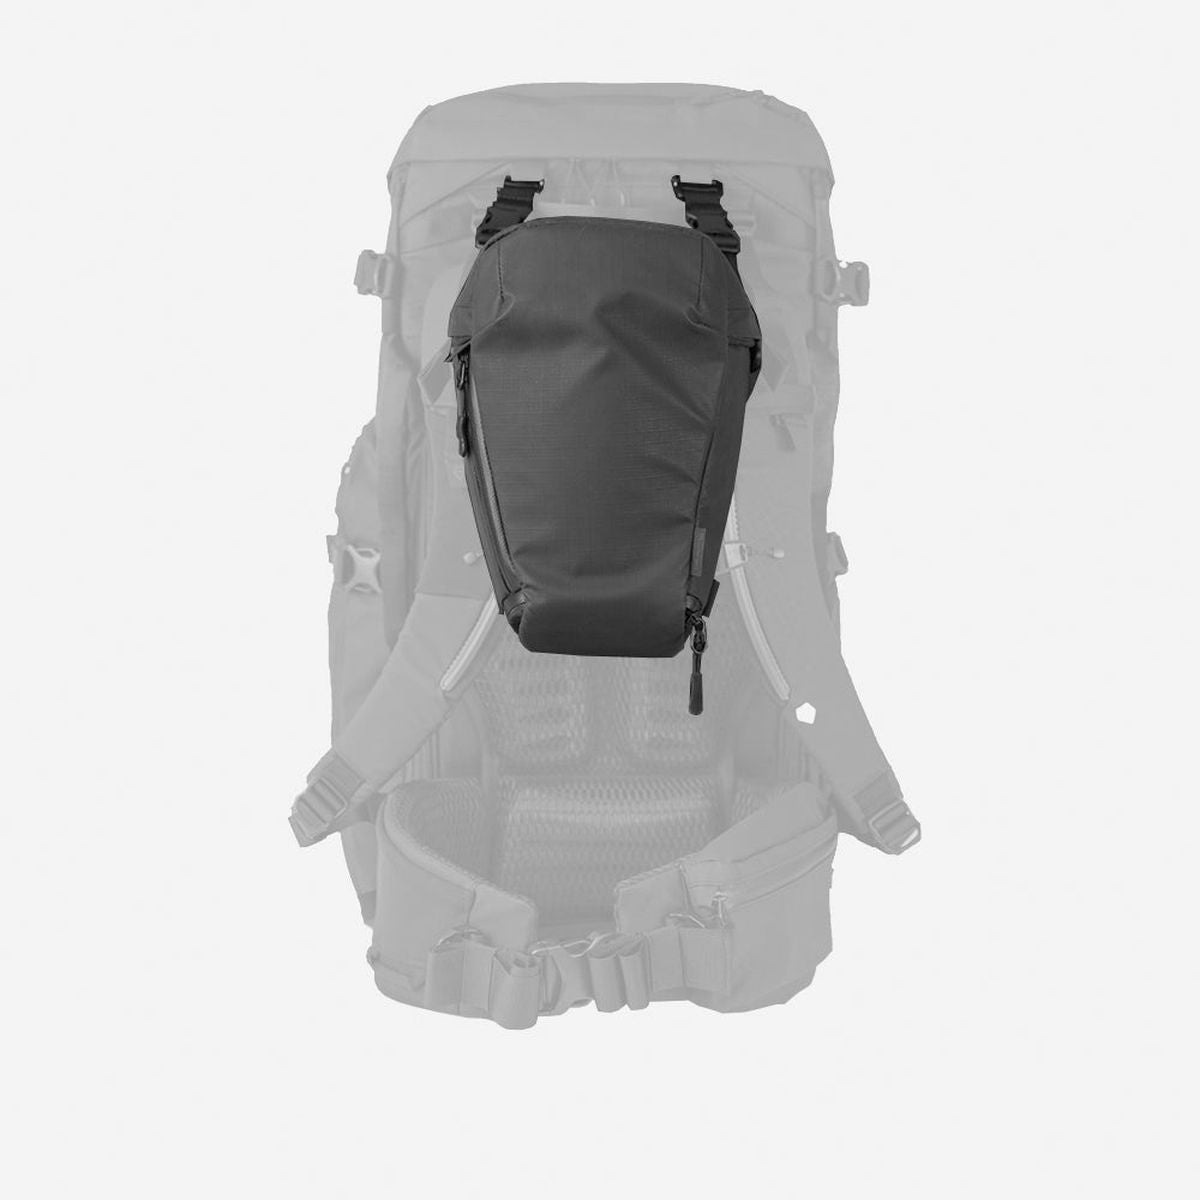 Wandrd ROUTE Chest Pack - Black